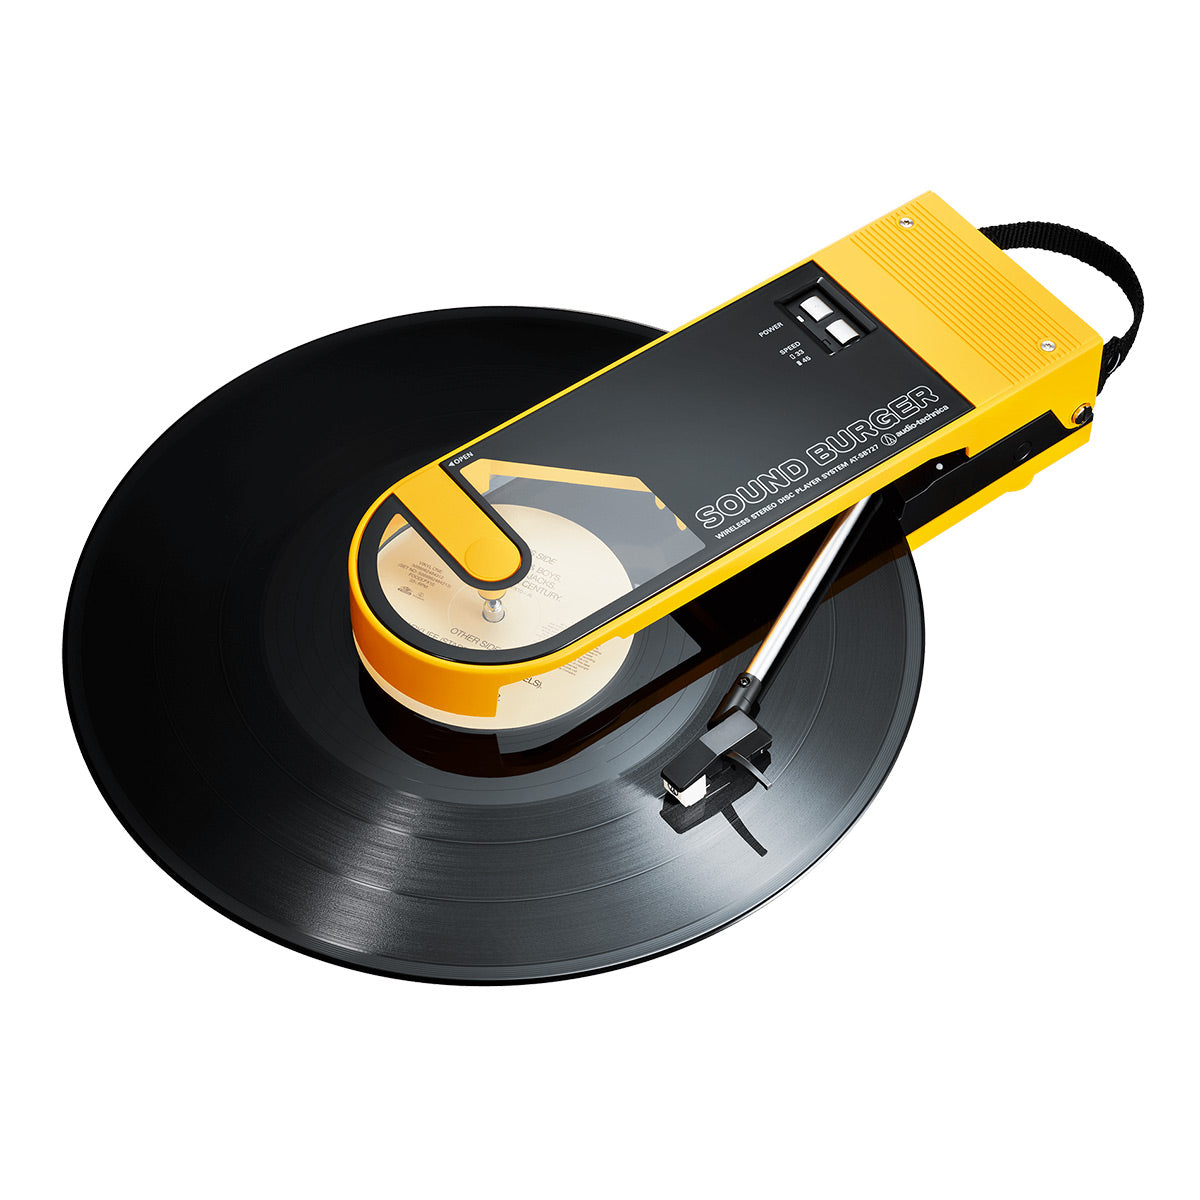 Audio-Technica AT-SB727 Sound Burger Portable Turntable with Bluetooth (Yellow)